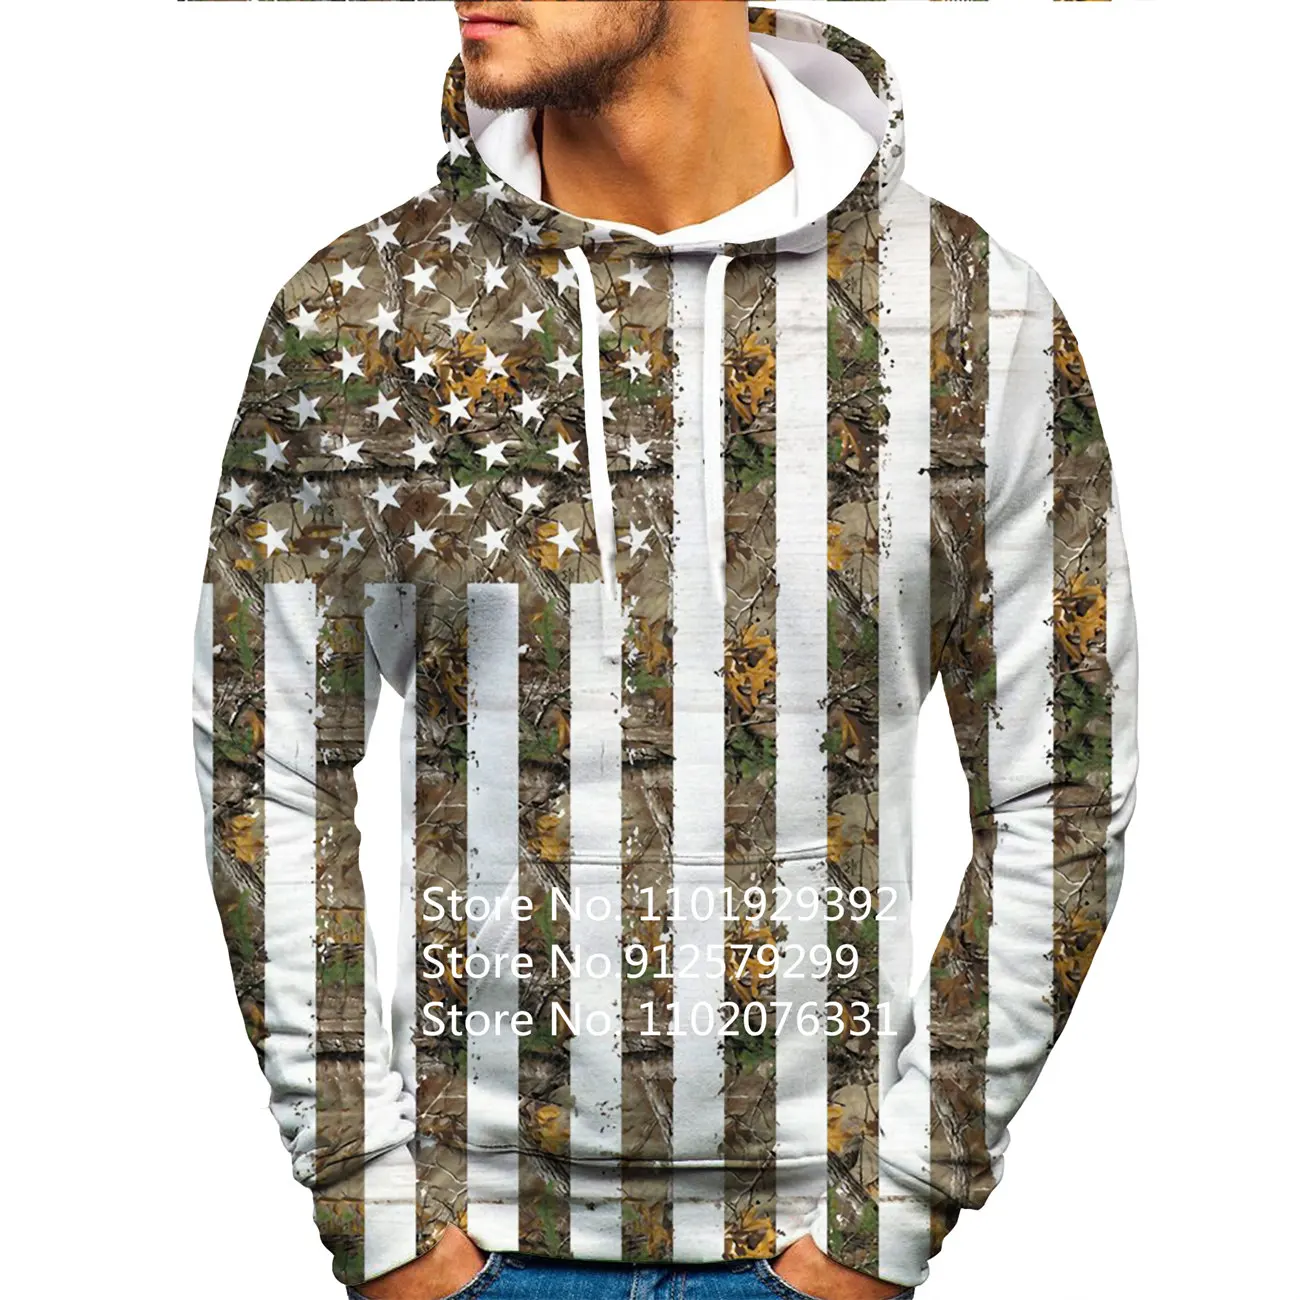 Camouflage American Flag Print Mens Hooded Sweatshirts Fashion Usa Flag Pattern Jackets Coat Autumn Street Trend Pullover